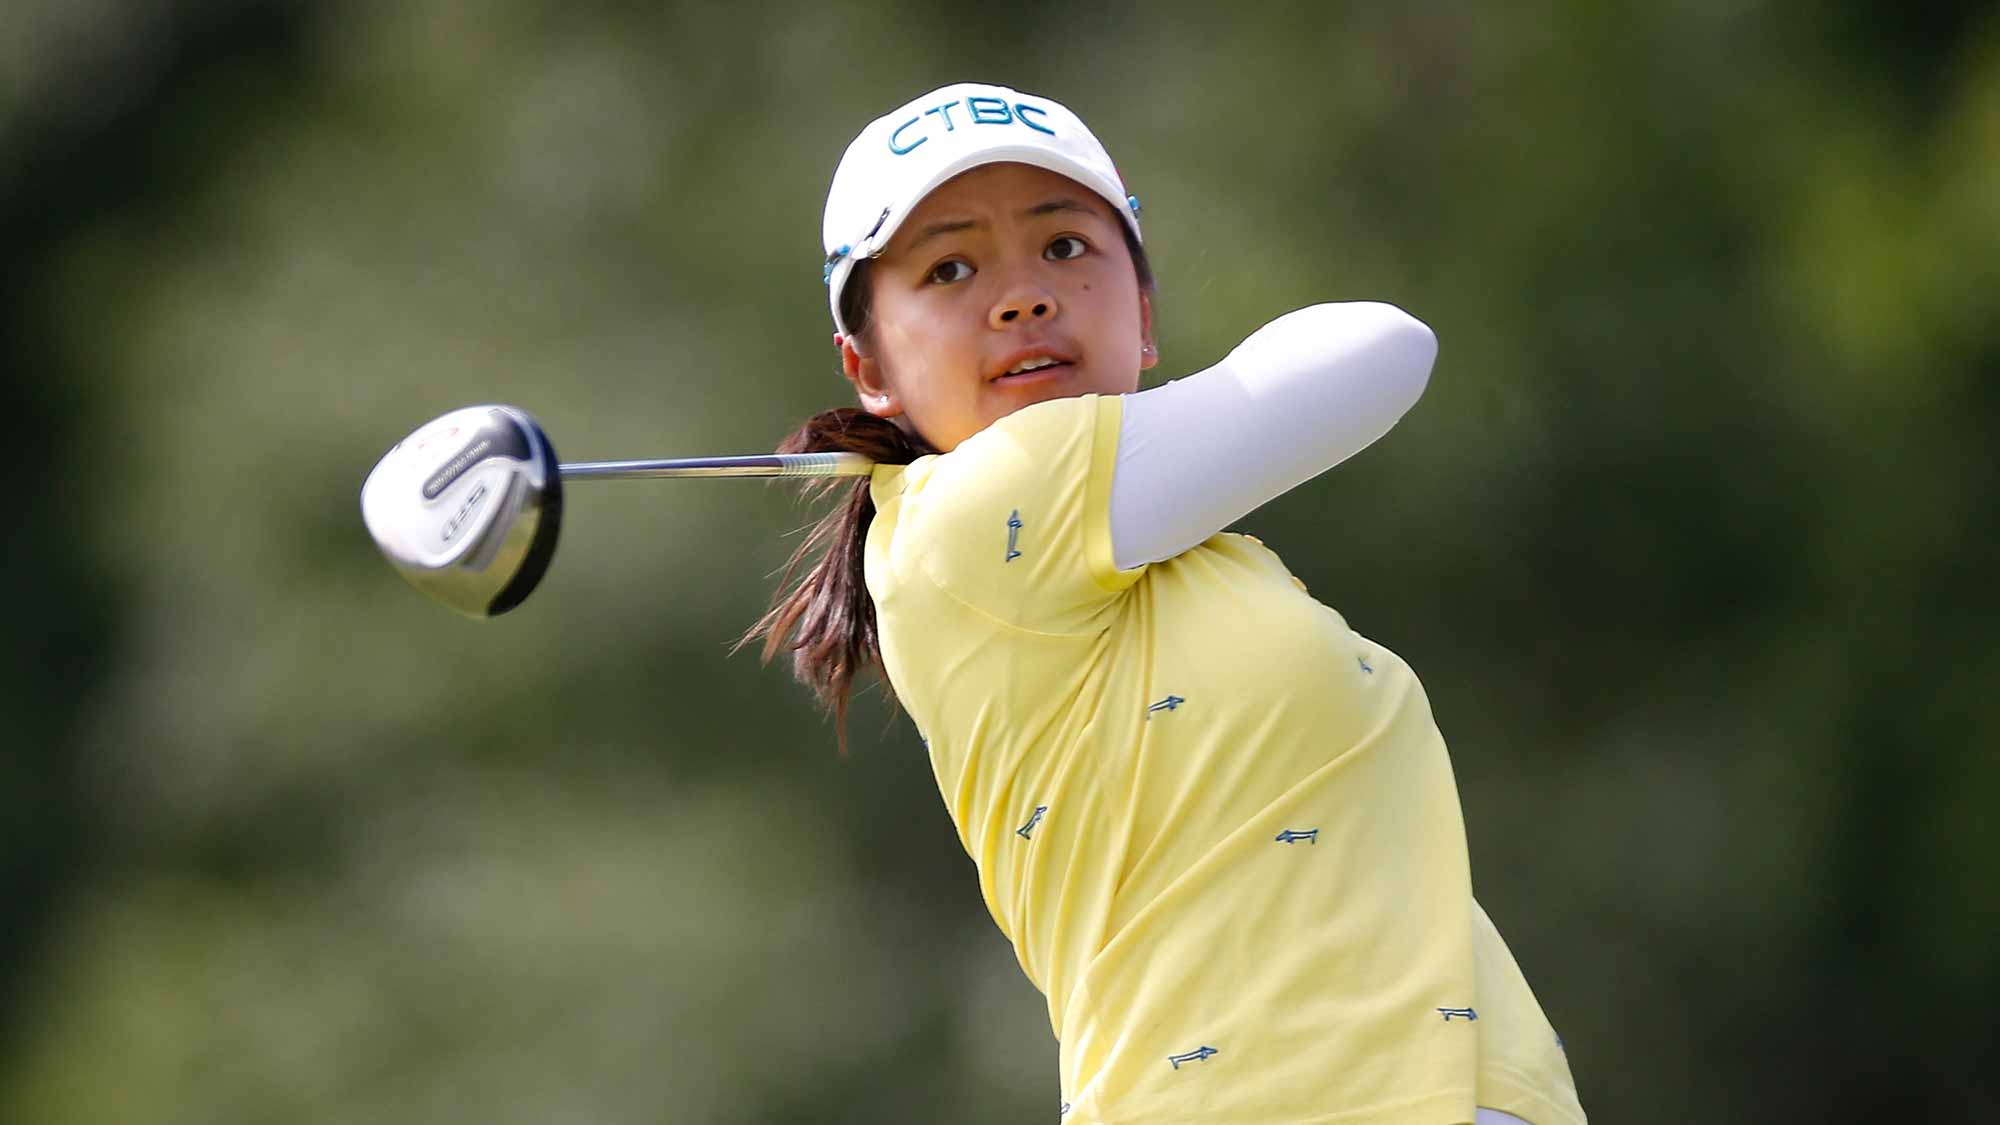 Wei-Ling Hsu of Chinese Taipei watches her tee shot on the 15th hole during the first round of the Marathon Classic presented by Owens Corning and O-I at Highland Meadows Golf Club